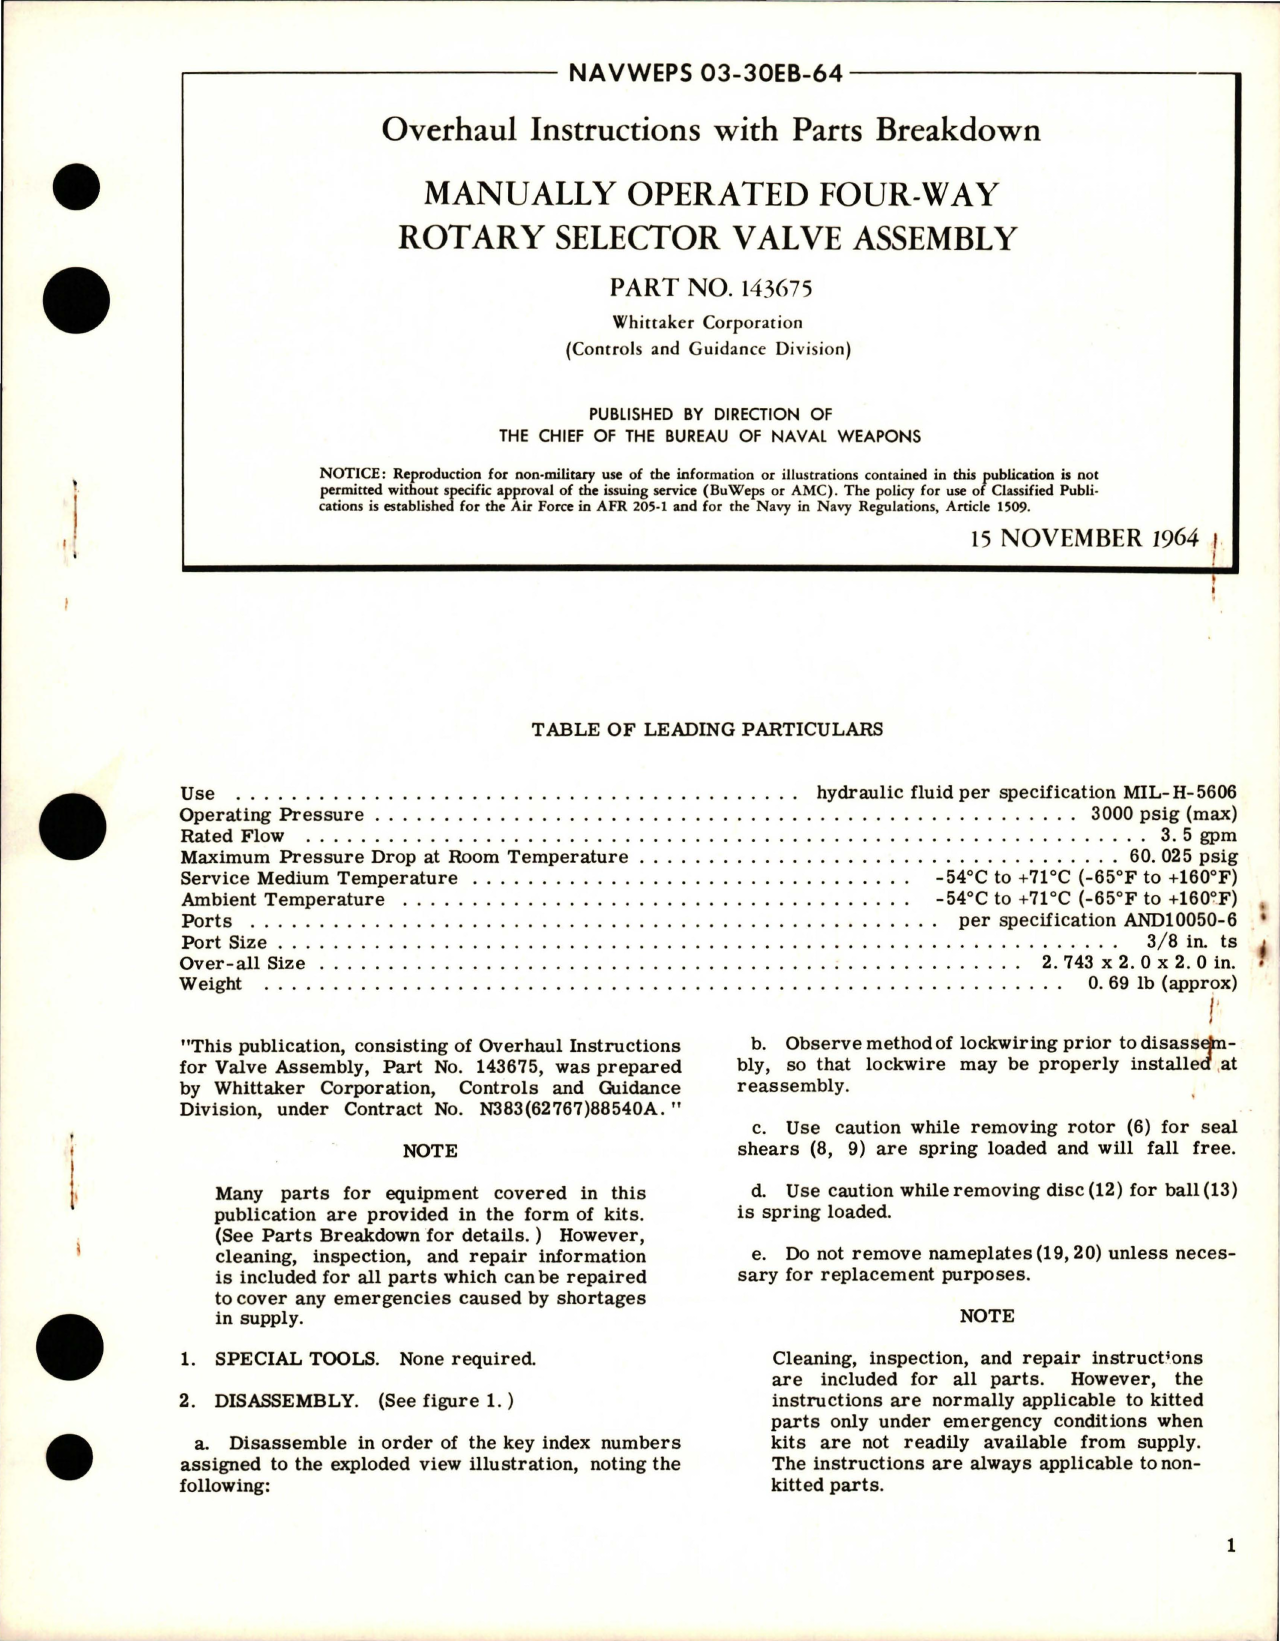 Sample page 1 from AirCorps Library document: Overhaul Instructions with Parts for Manually Operated Four Way Rotary Selector Valve Assembly - Part 143675